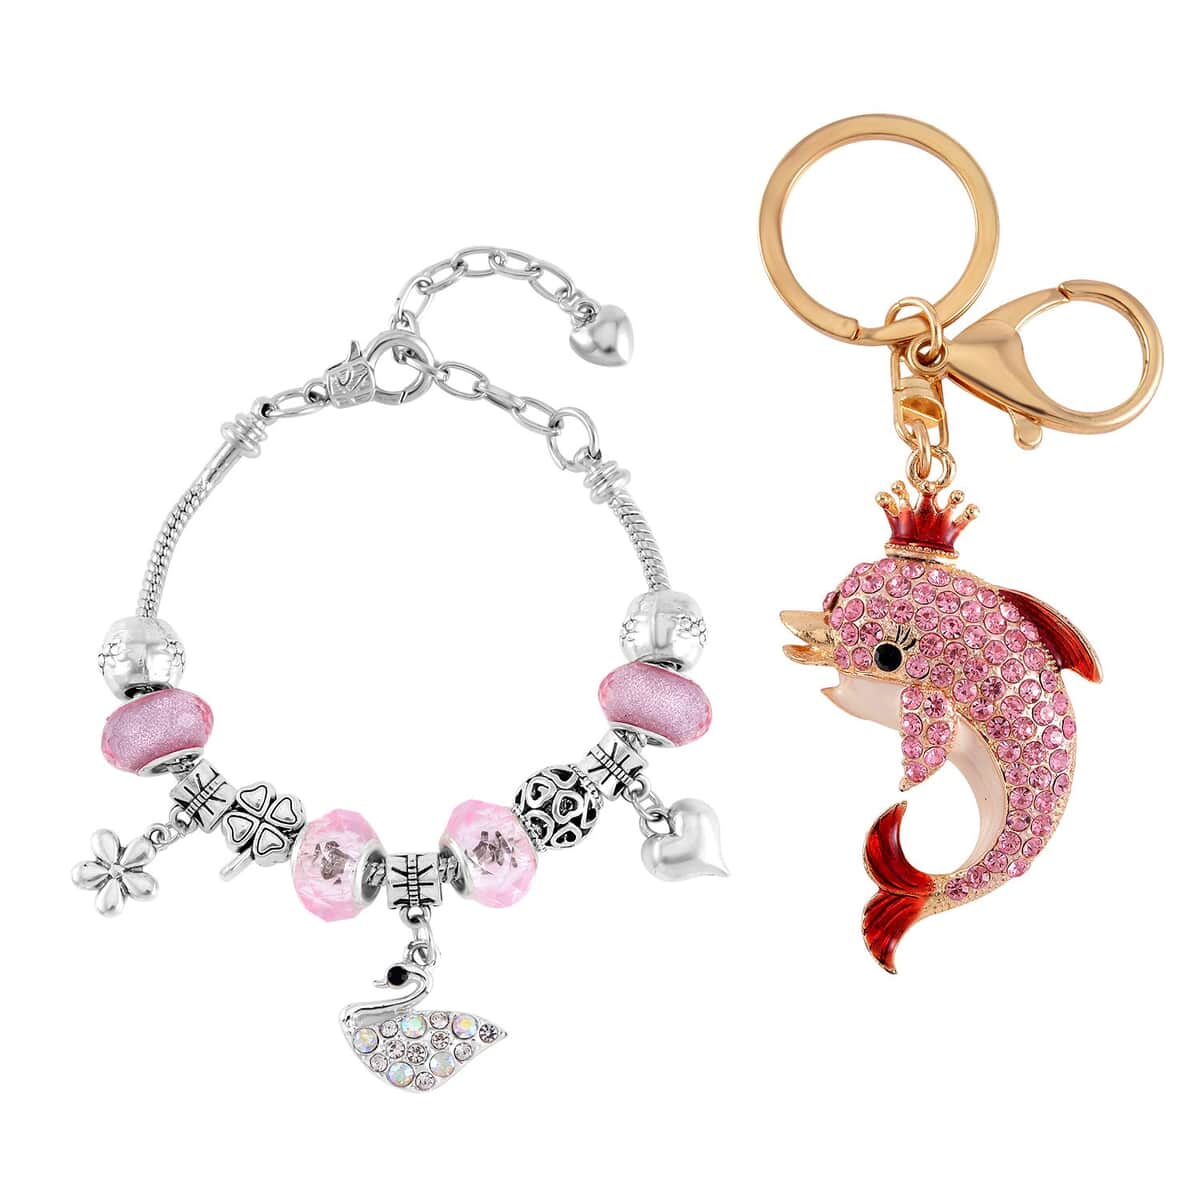 Pink Resin, Multi Austrian Crystal Bracelet (7-9In) in Silvertone with Enameled Dolphin Keychain in Goldtone image number 0